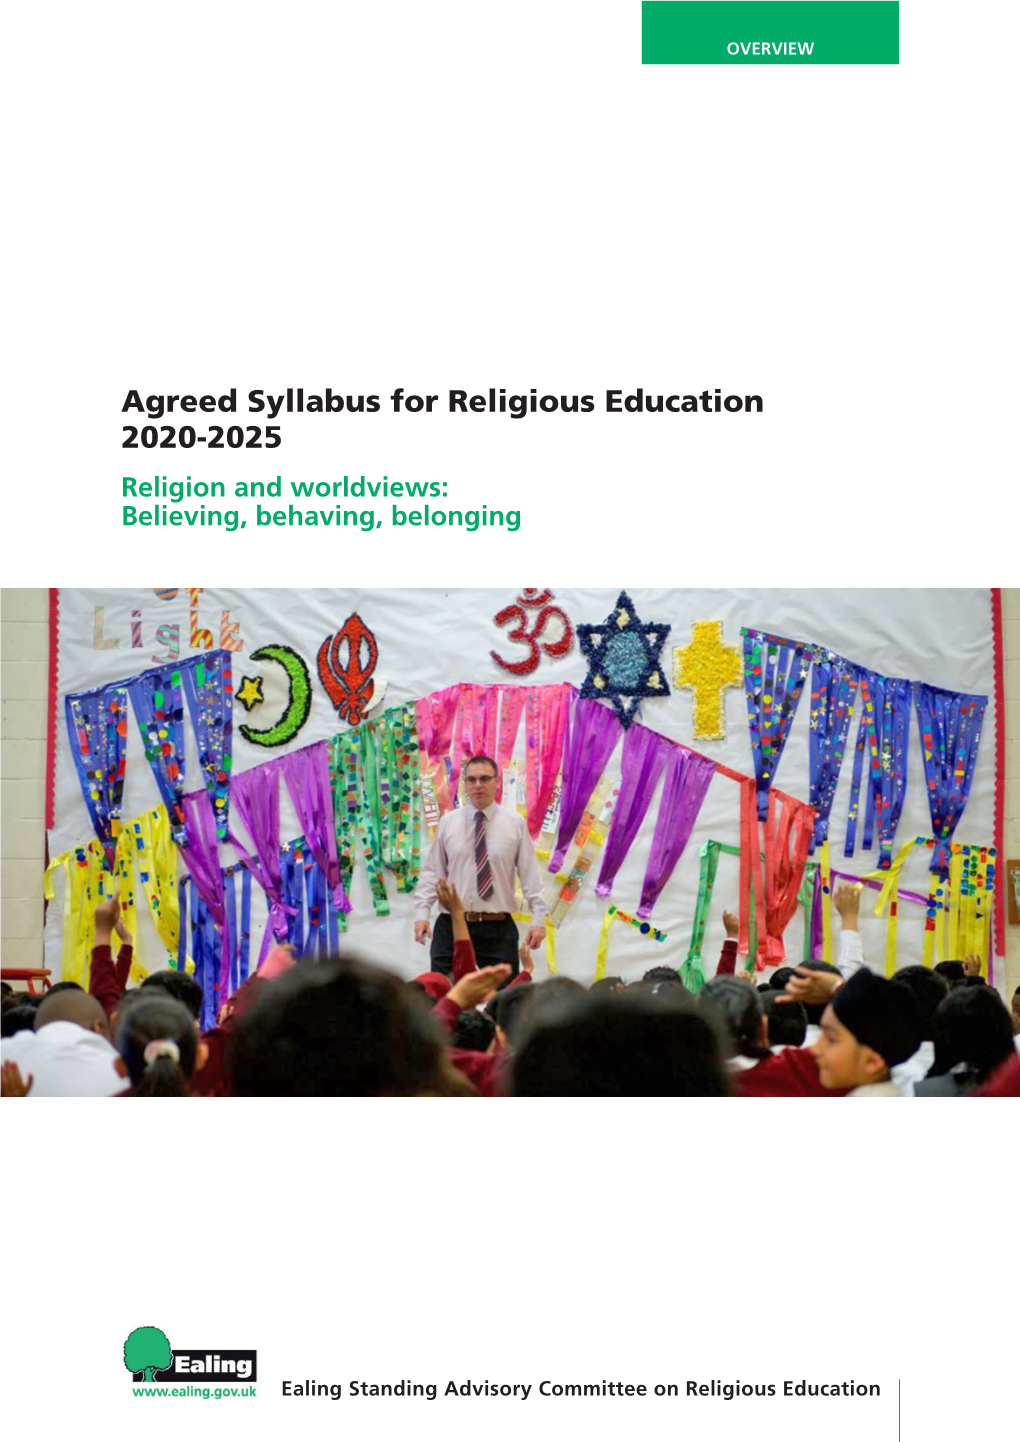 Agreed Syllabus for Religious Education 2020-25: Religion and Worldviews